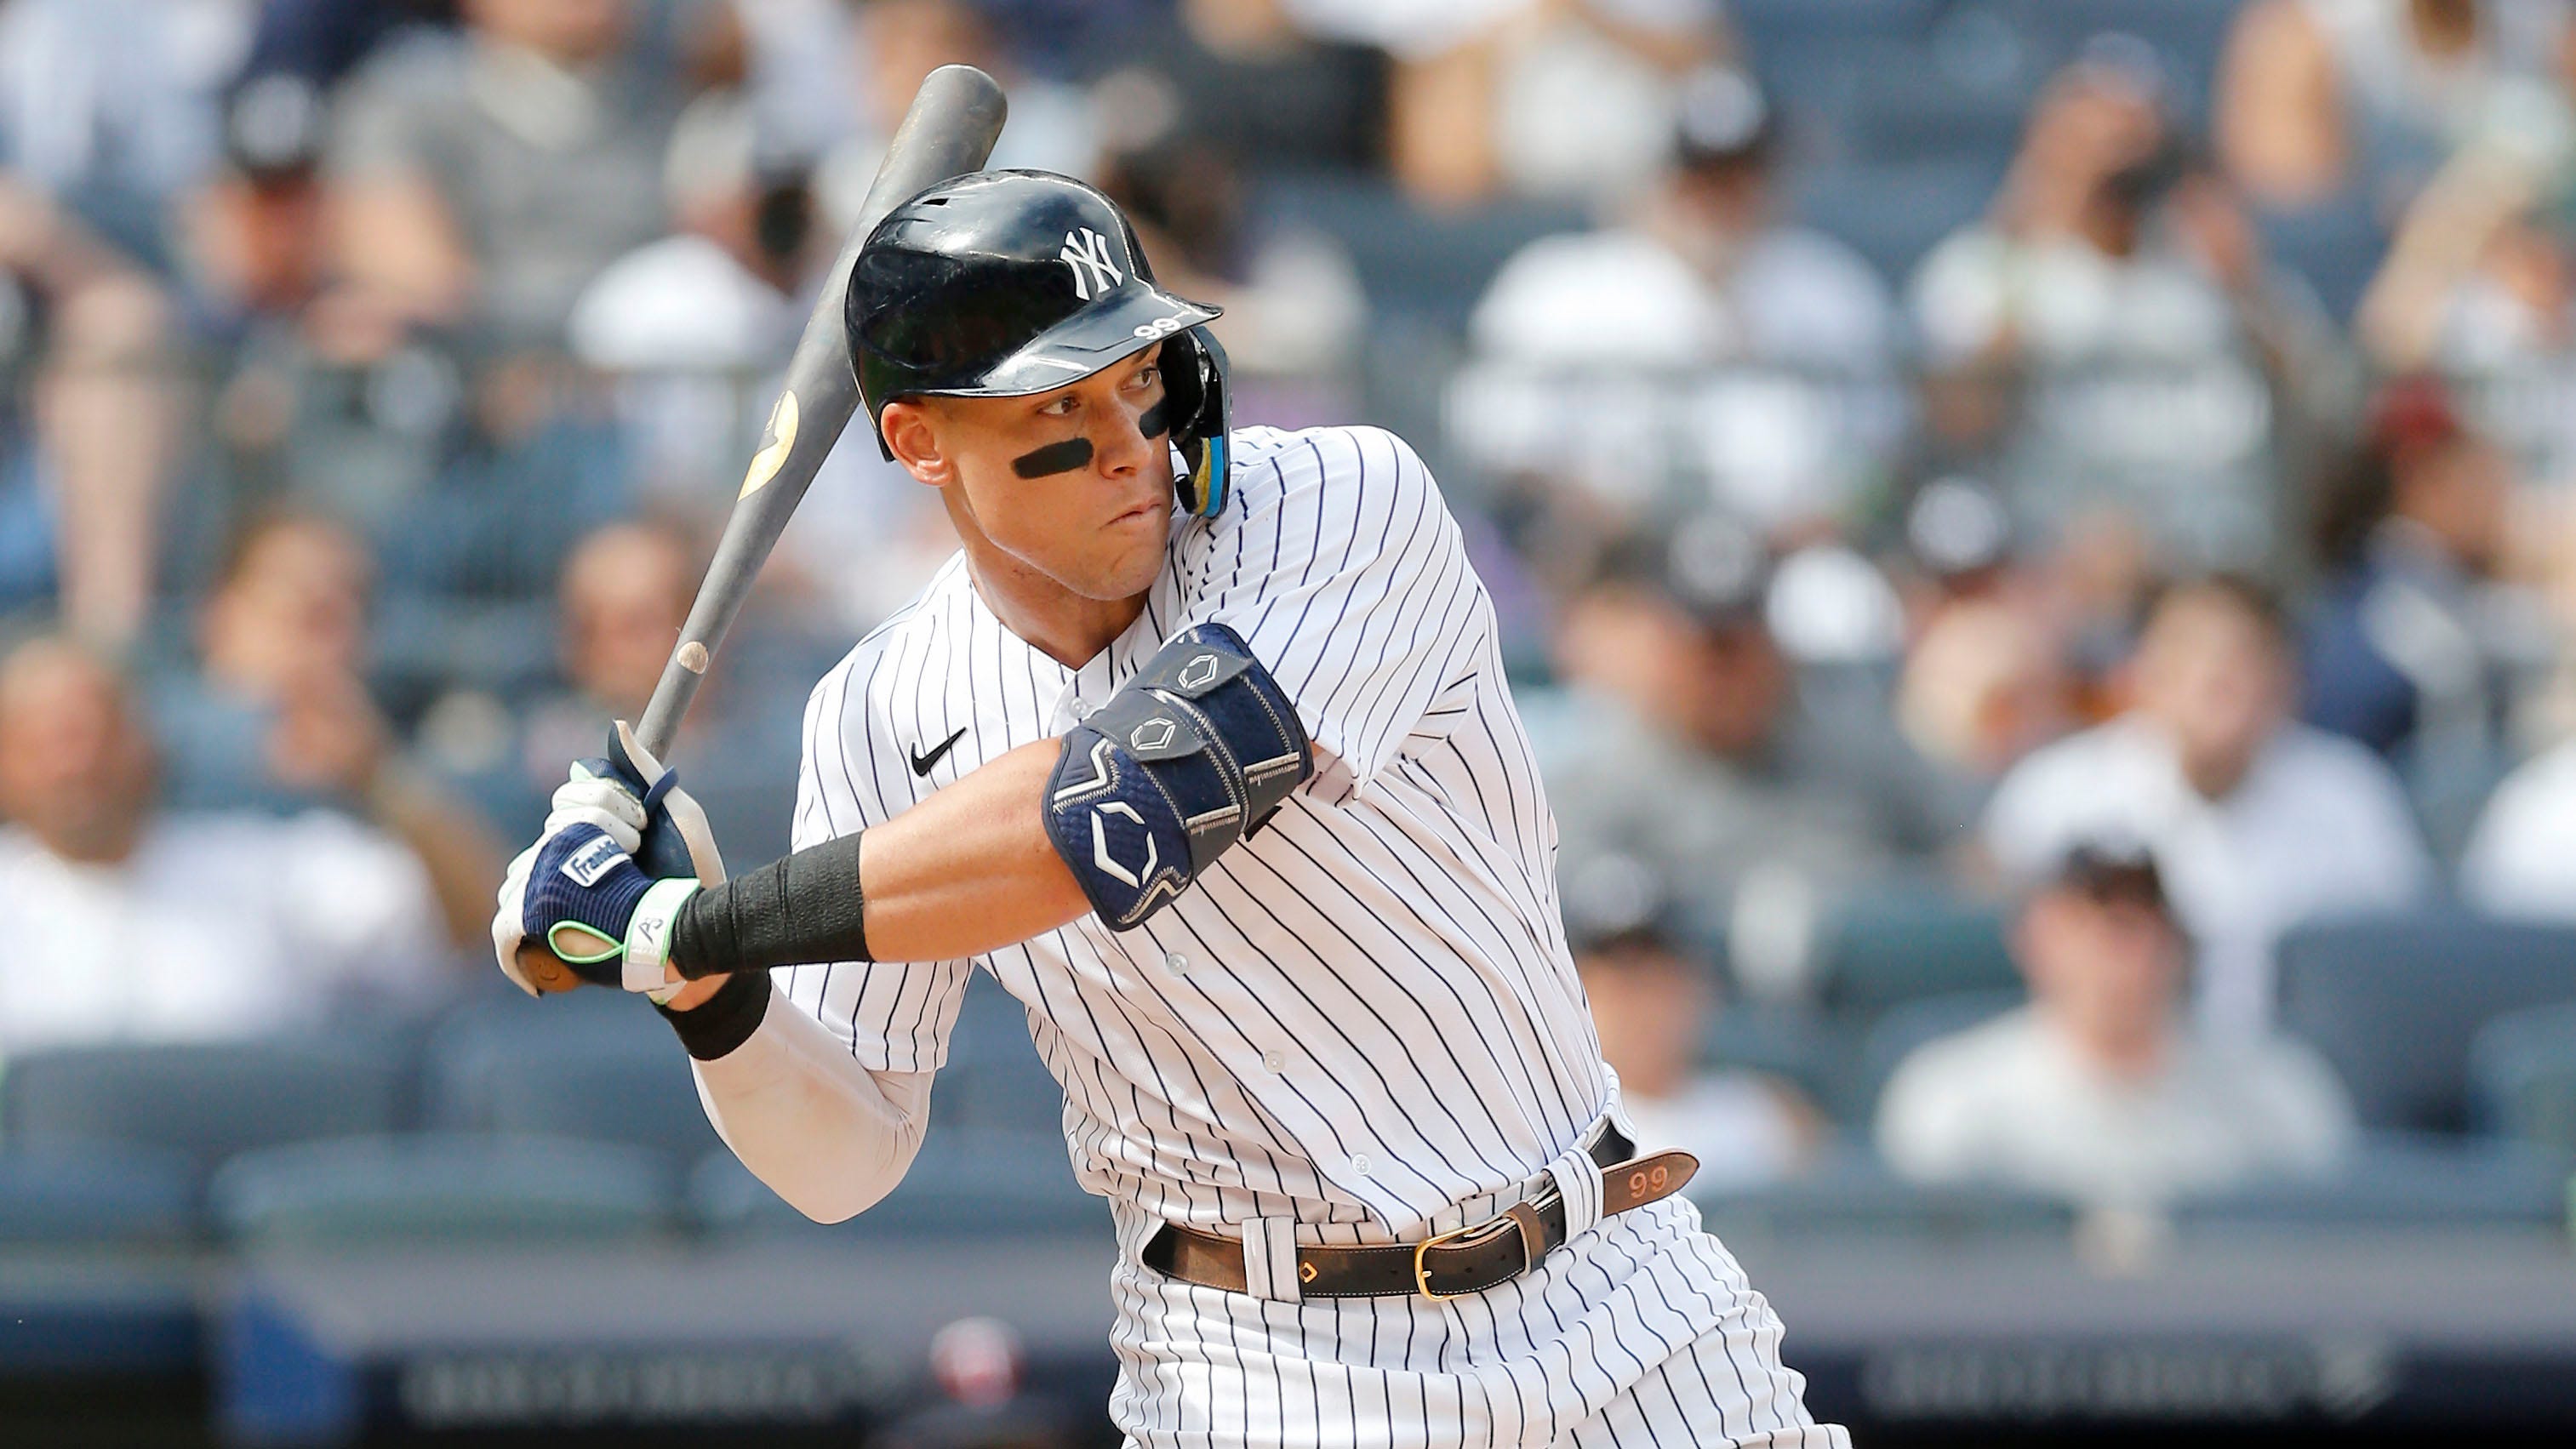 Aaron Judge rewrites Yankees’ record books with 55th home run